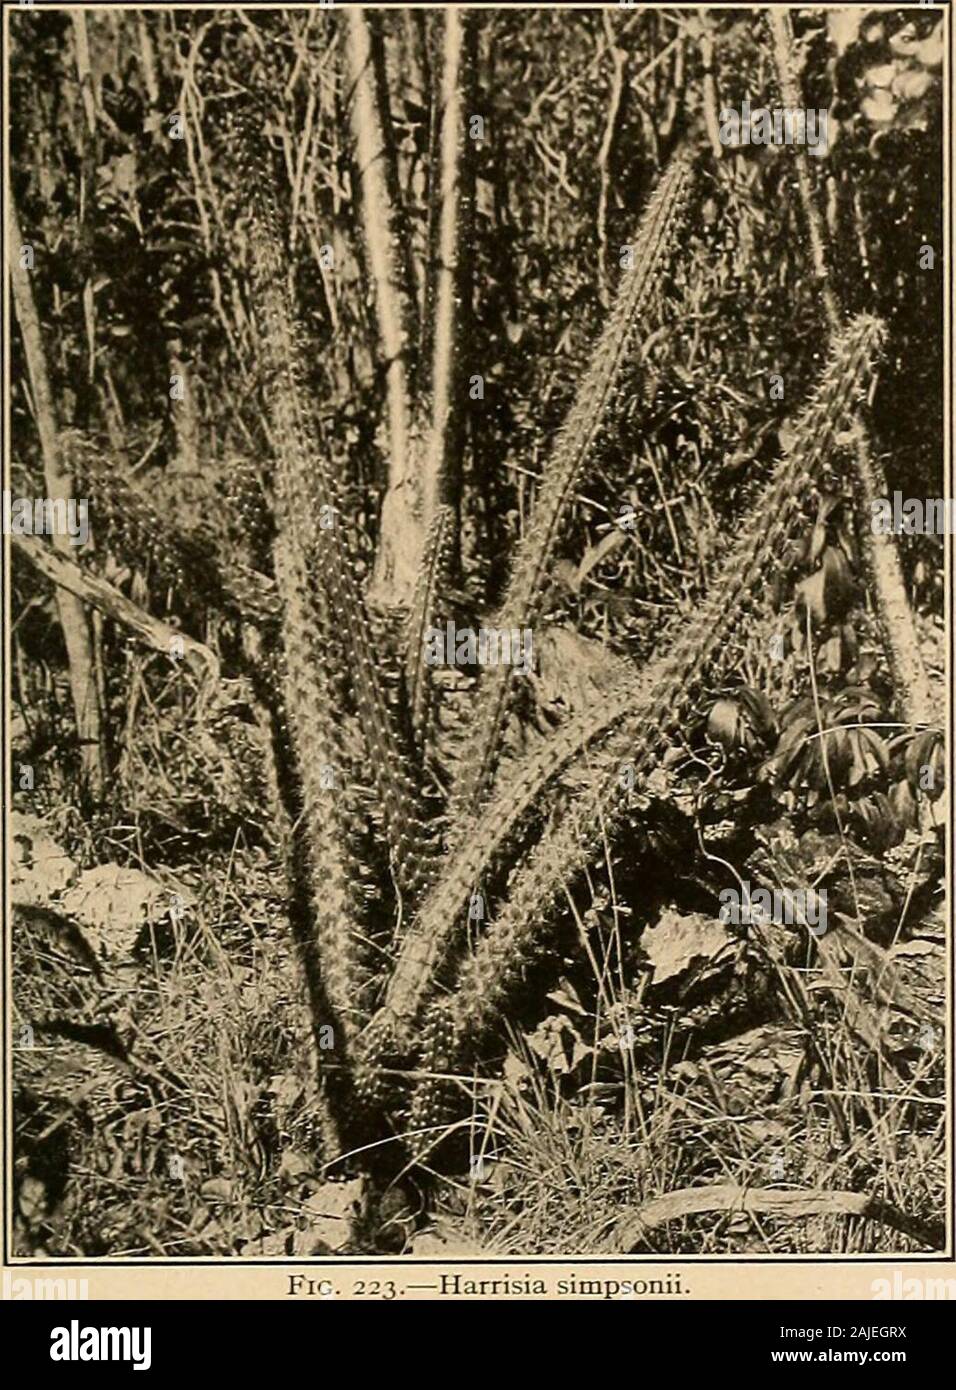 The Cactaceae : descriptions and illustrations of plants of the cactus family . M K. Baton rtel 1. Part of fruiting branch of Harrisia gracilis. 2. Top of flowering branch of Harrisia martinii. (Natural size.) HARRISIA. 153 Found on Hammocks, Keys of Florida, and southern mainland coast. Type frombetween Cape Sable and Flamingo, collected by John K. Small, November 29, 1916. The species is dedicated to Charles Torrey Simpson, naturalist, long resident in Florida. Flowers of a plant from Pumpkin Key, grown at the cactus garden of Mr. Charles Deering, Miami, Florida, and at the New York Botanica Stock Photo